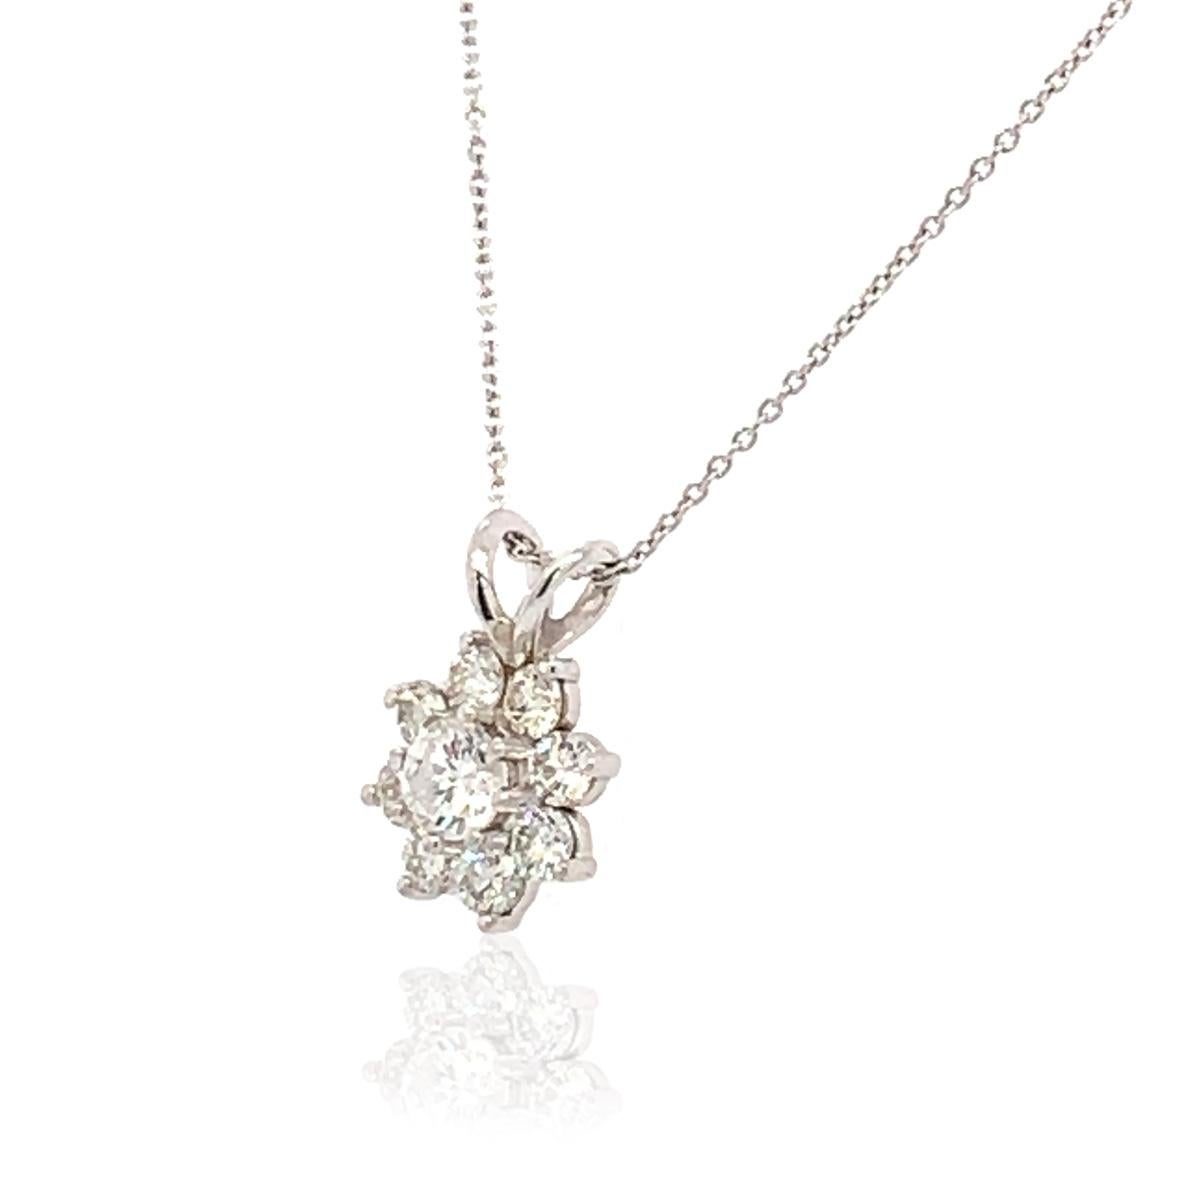 This halo diamond pendant features eight brilliant diamonds surrounding a round brilliant-cut center diamond. Set in 14k white gold, this 0.73 carat total weight pendant is all glitz! Experience the Difference!

Product details: 

Center Gemstone